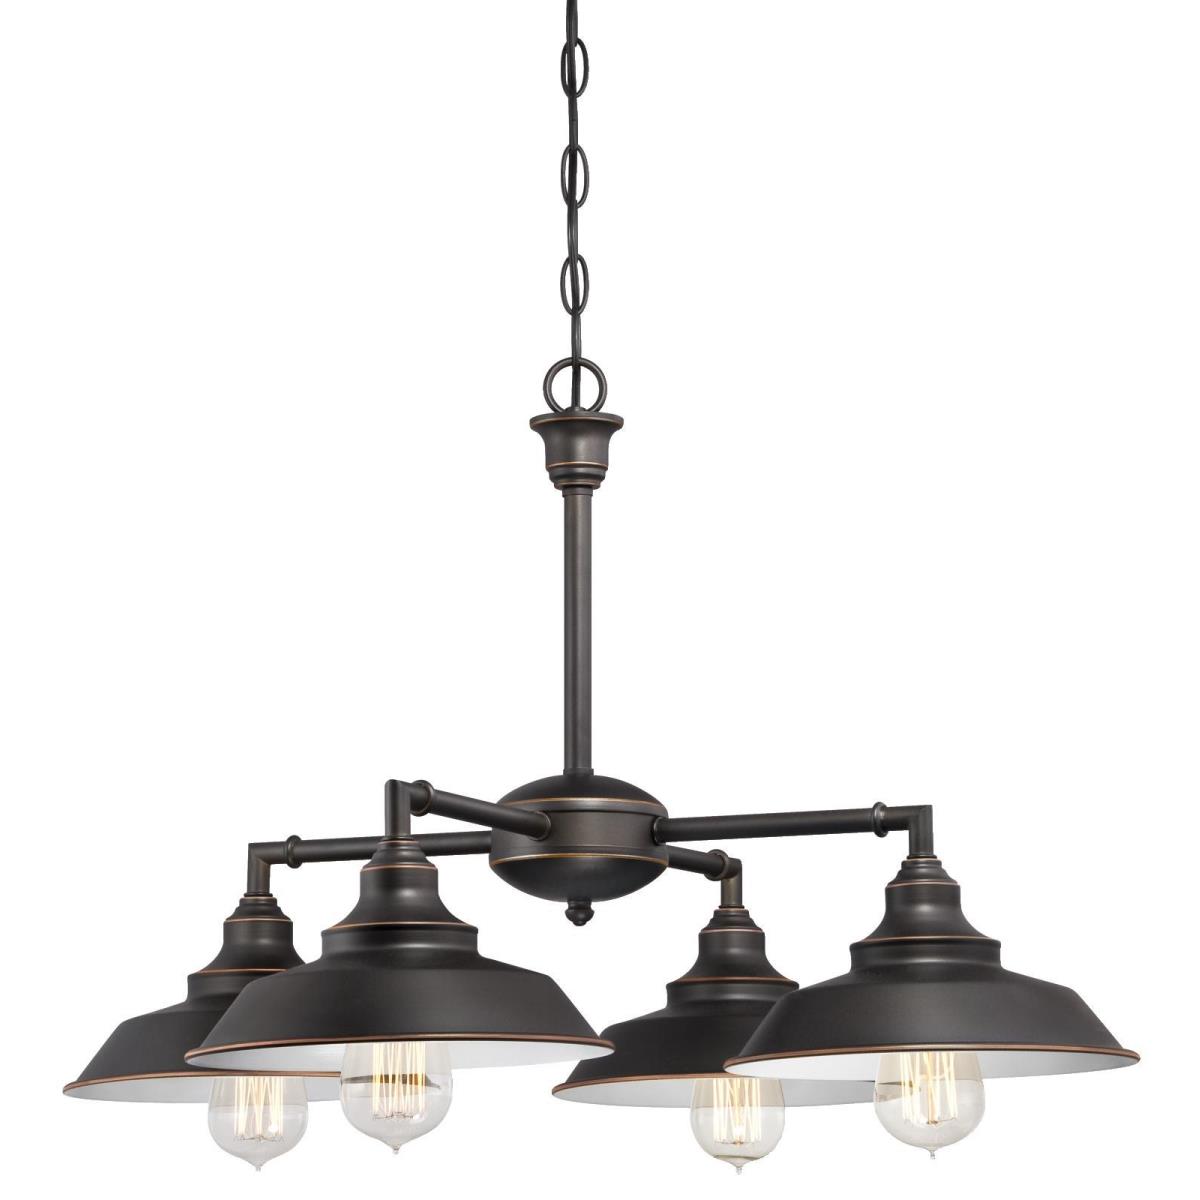 4 Light Chandelier/Semi-Flush Oil Rubbed Bronze Finish with Highlights